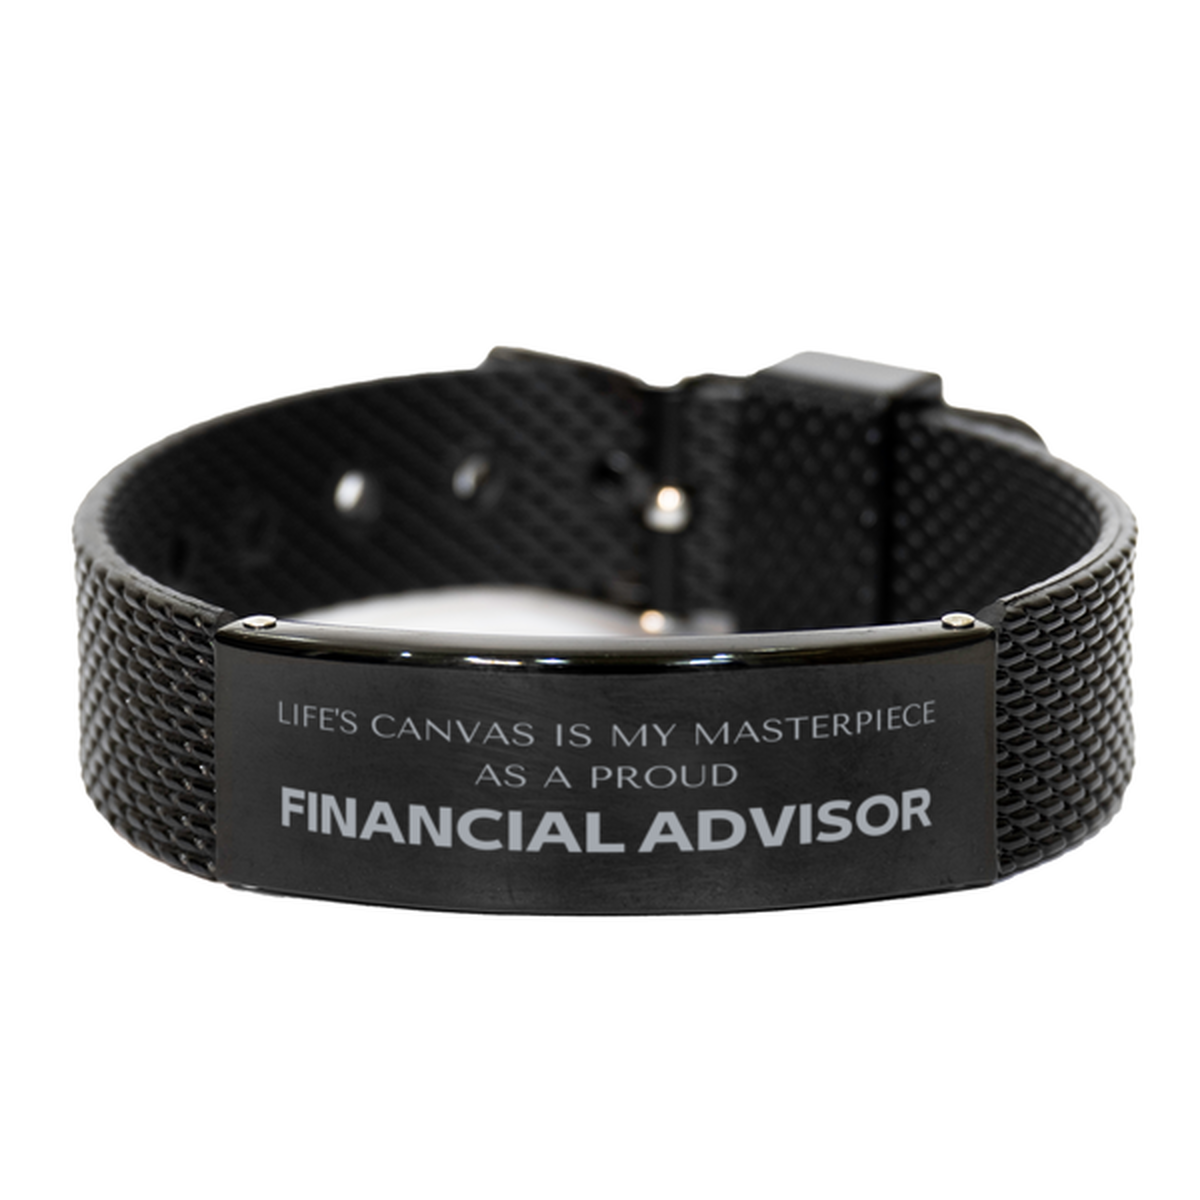 Proud Financial Advisor Gifts, Life's canvas is my masterpiece, Epic Birthday Christmas Unique Black Shark Mesh Bracelet For Financial Advisor, Coworkers, Men, Women, Friends